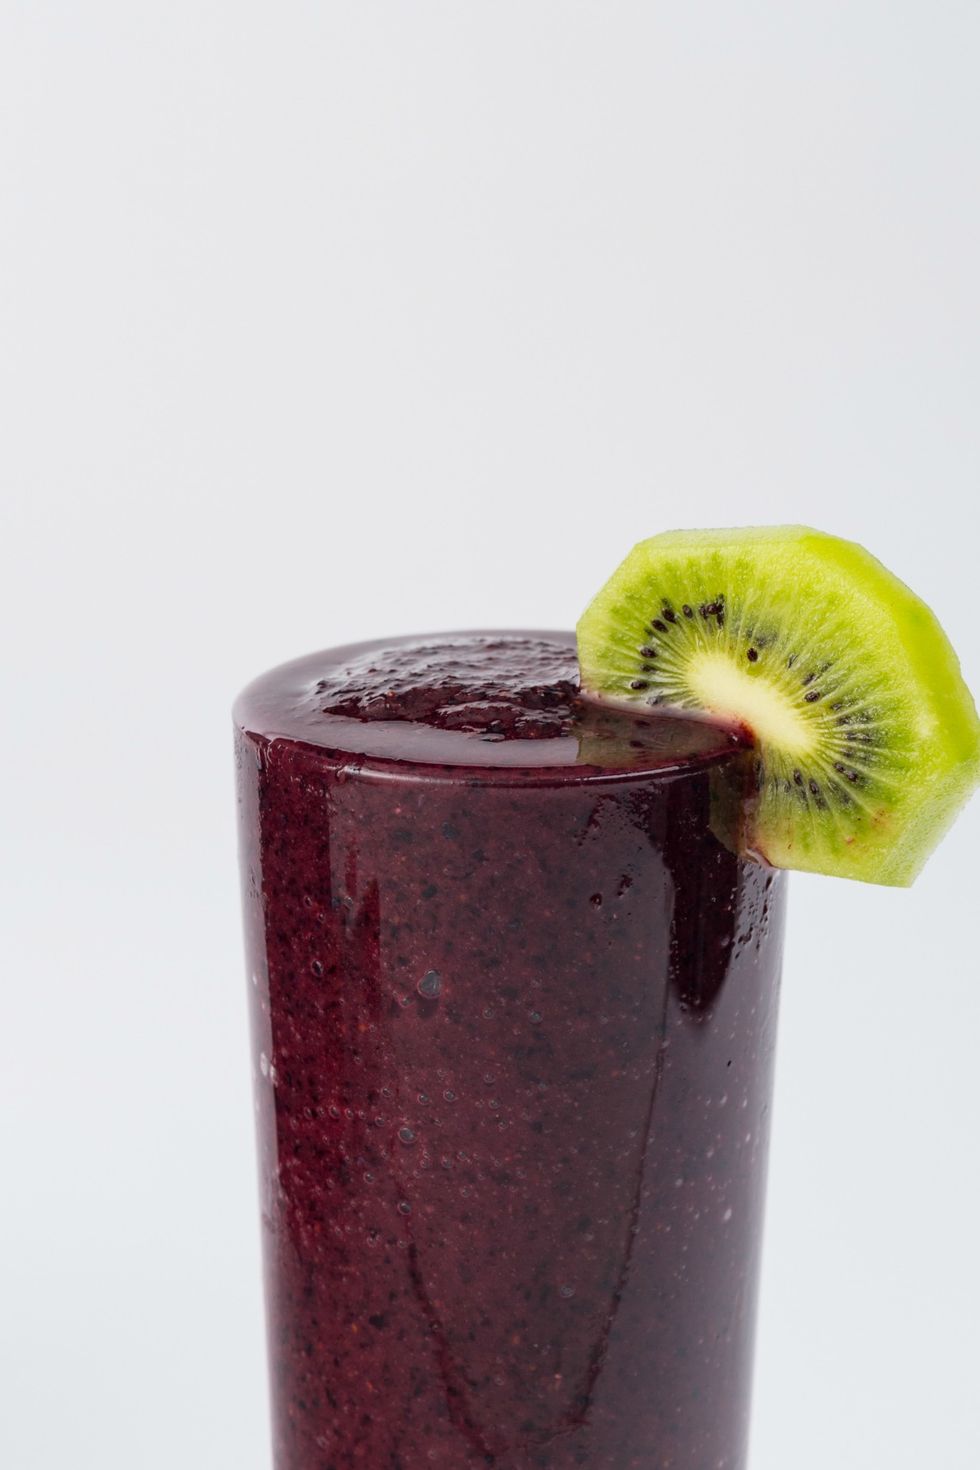 how to make tasty healthy smoothies